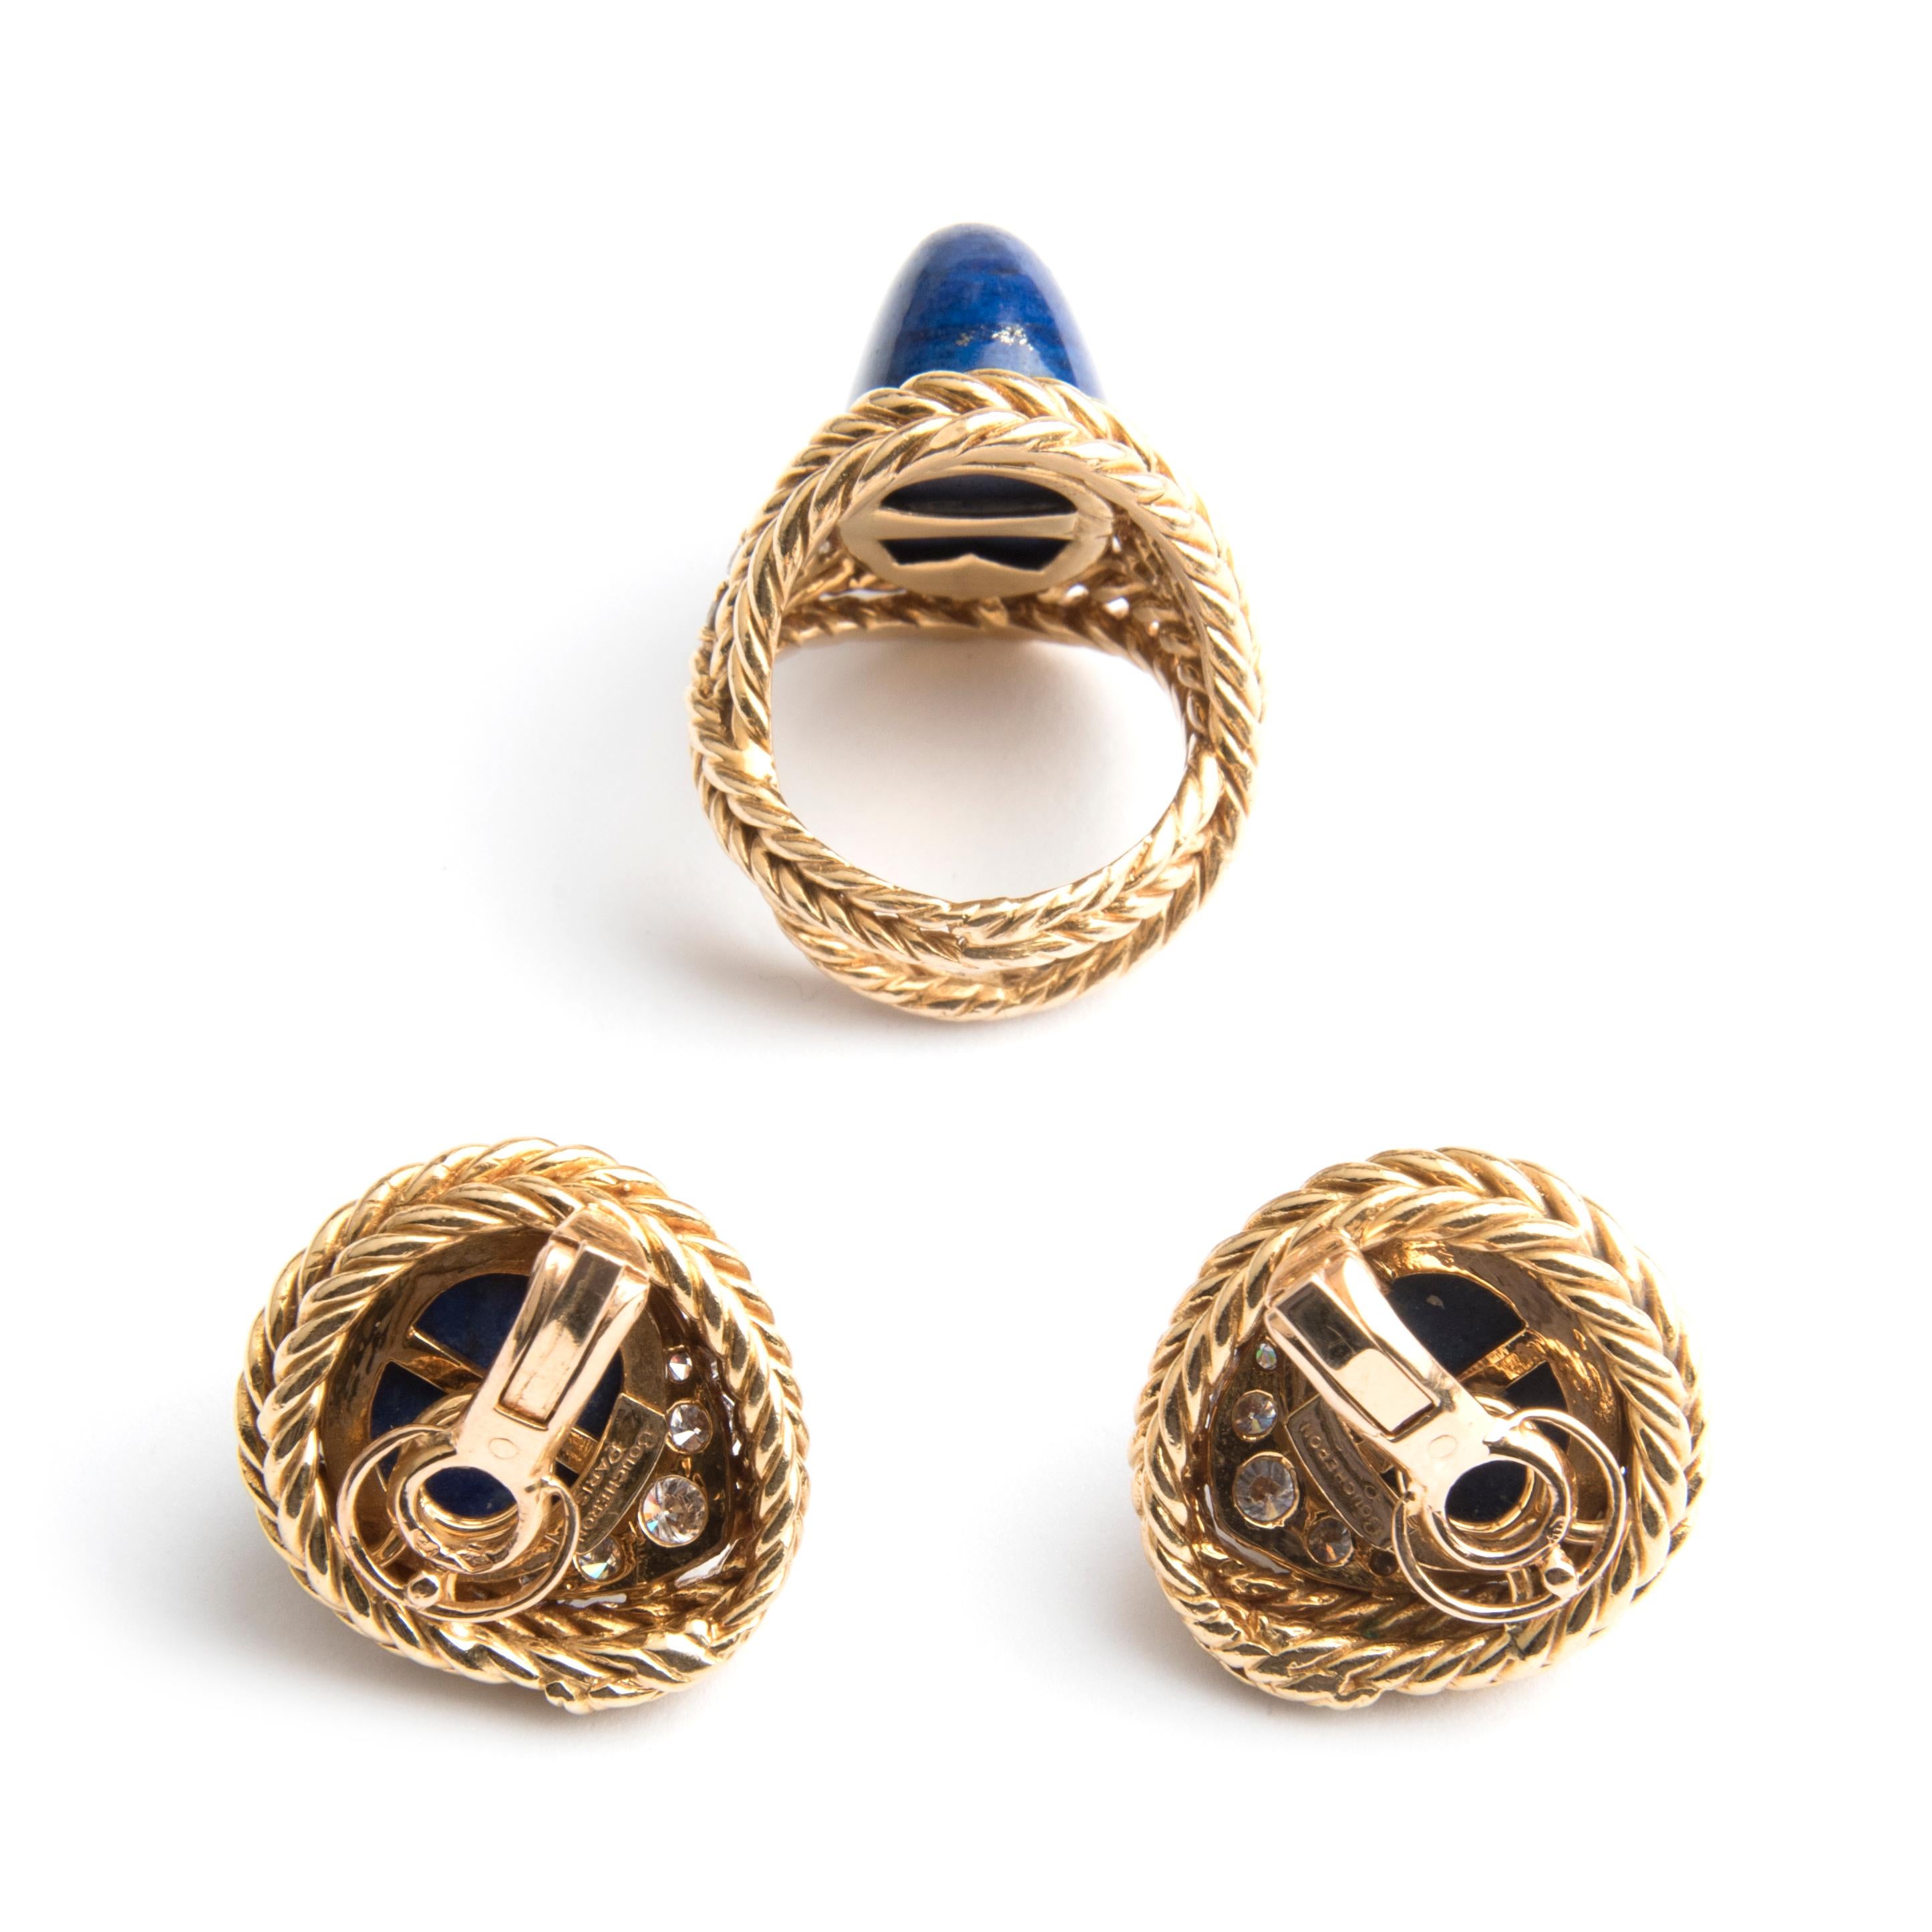 Boucheron 18k Yellow Gold Diamond and Lapis Lazuli Ring and Earrings Set In Good Condition For Sale In London, GB